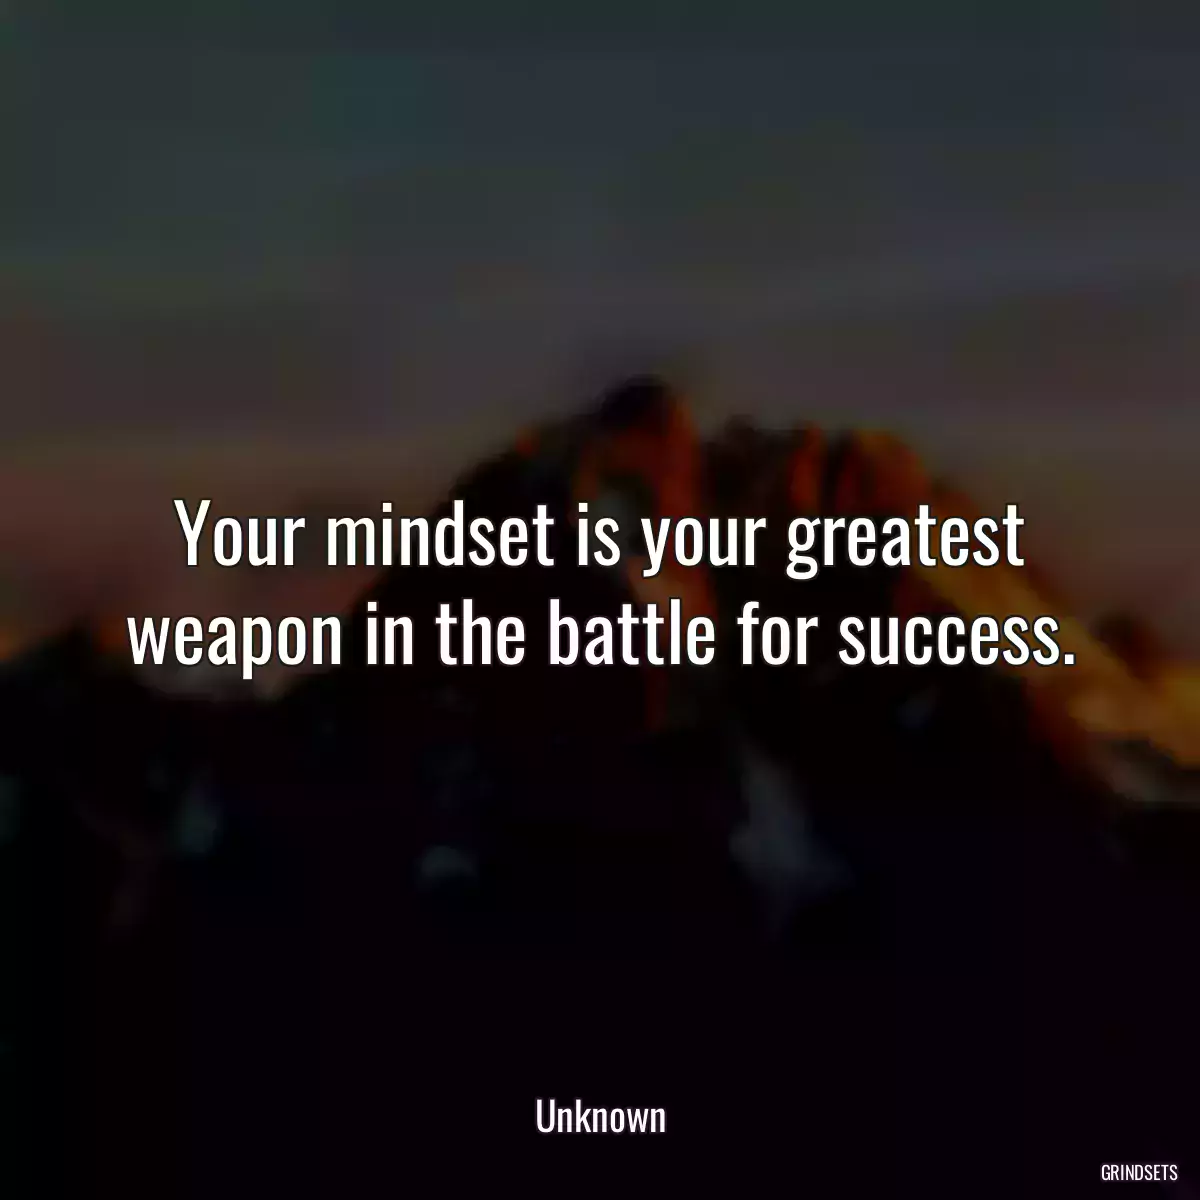 Your mindset is your greatest weapon in the battle for success.